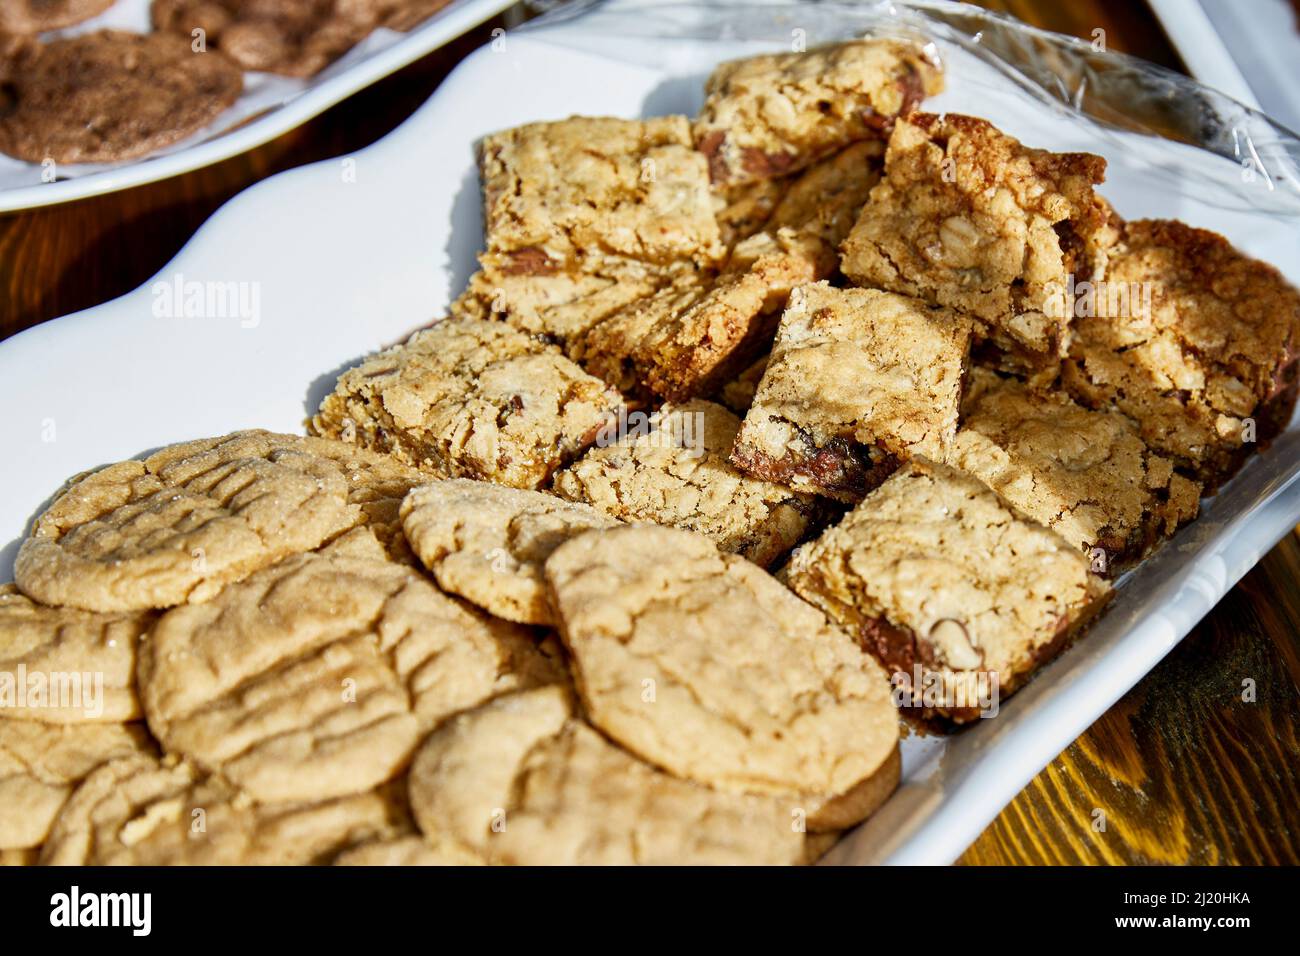 Homemade Peanut Butter Cookies and date bars with shallow depth of field Stock Photo